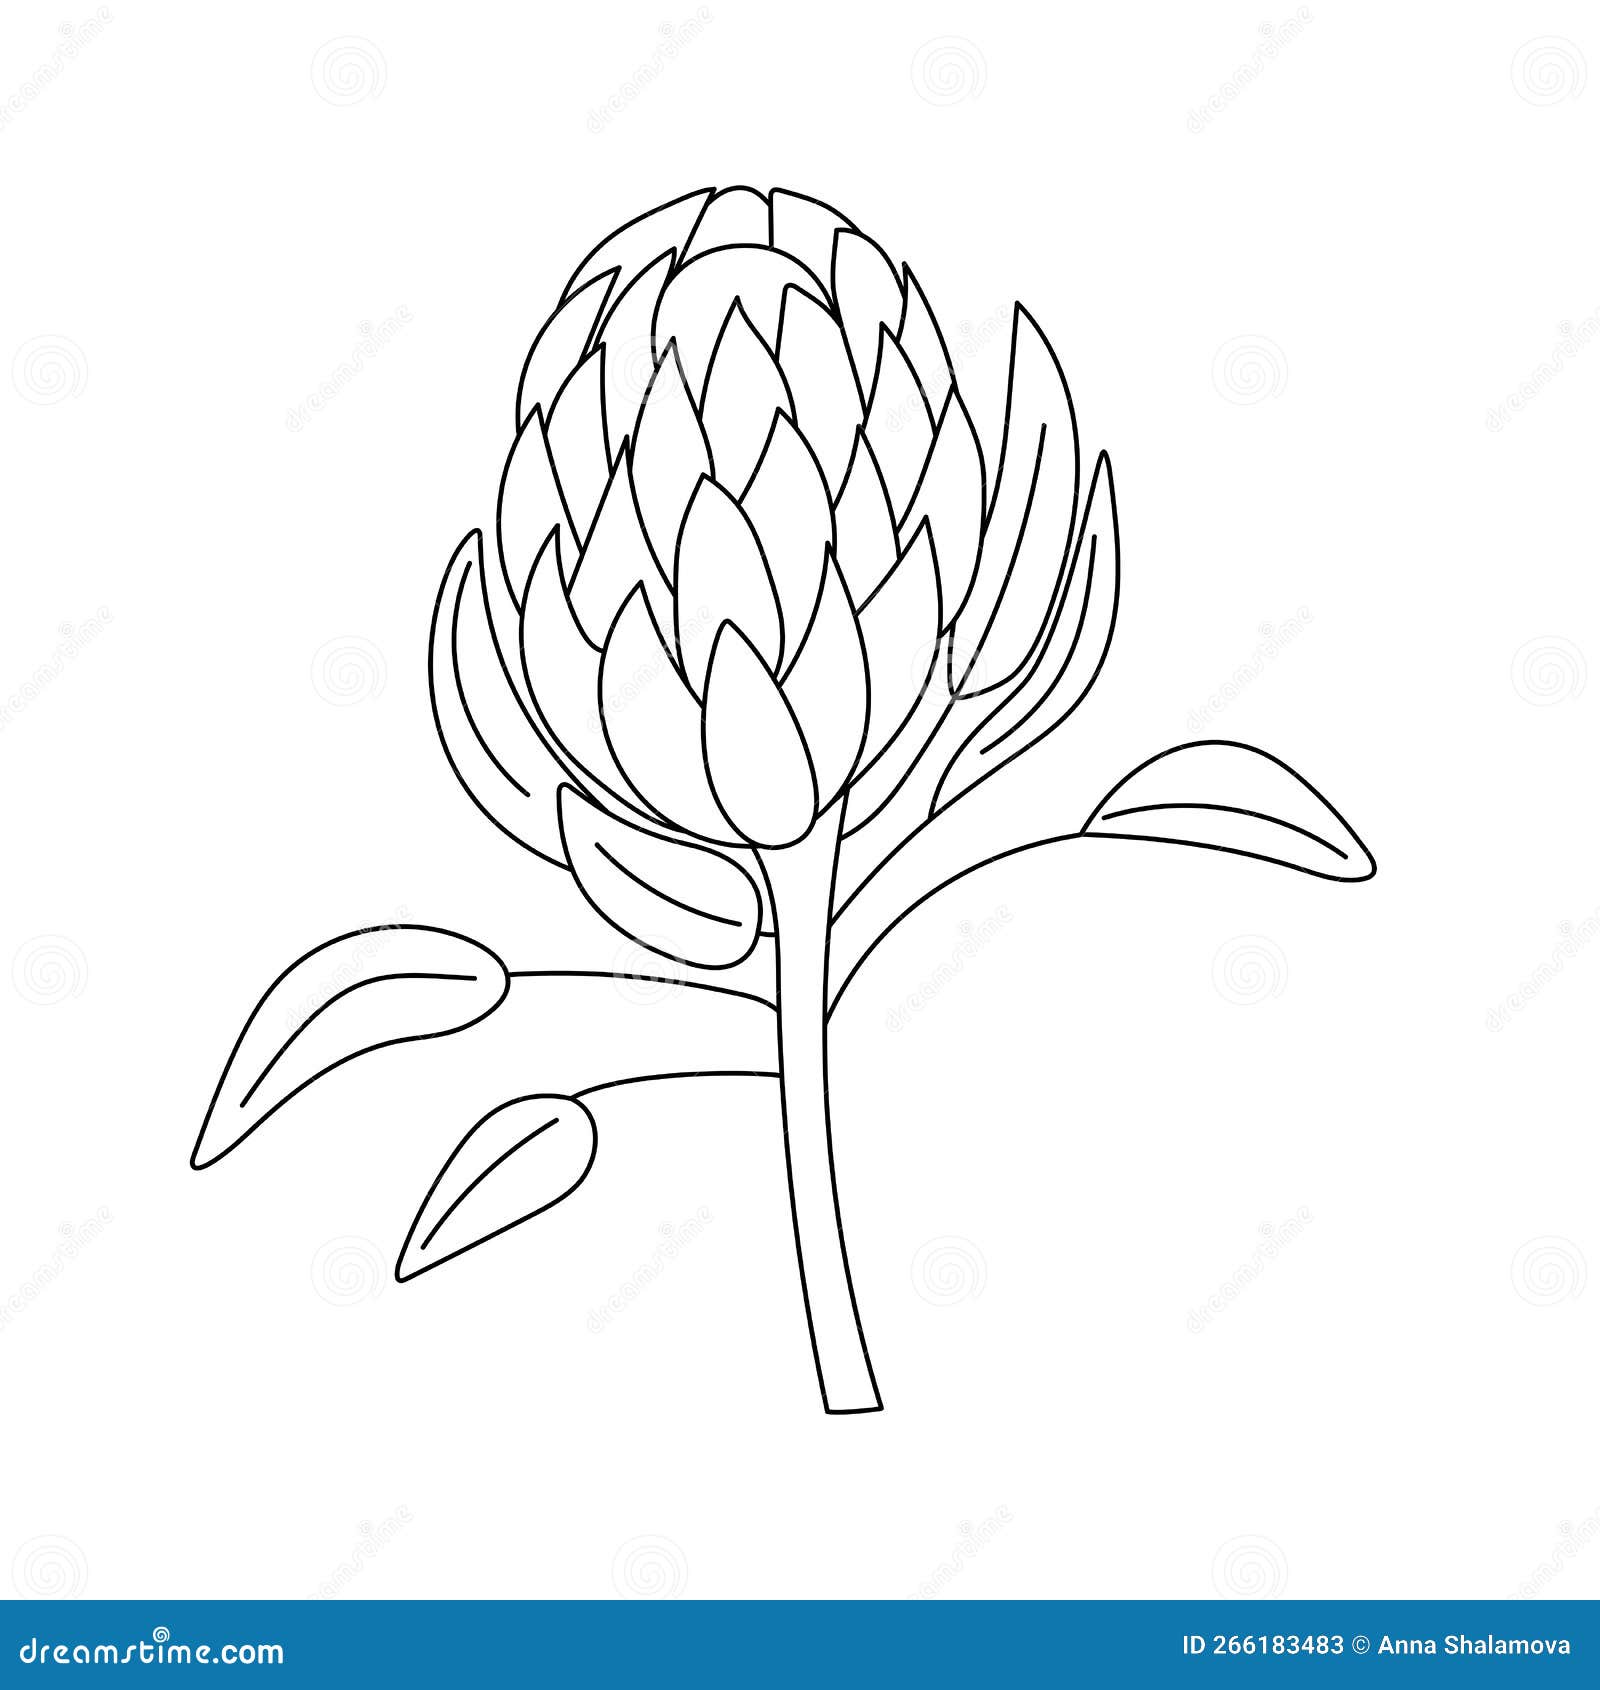 Outline Drawing of a Protea Flower.Vector Illustration Stock Vector ...